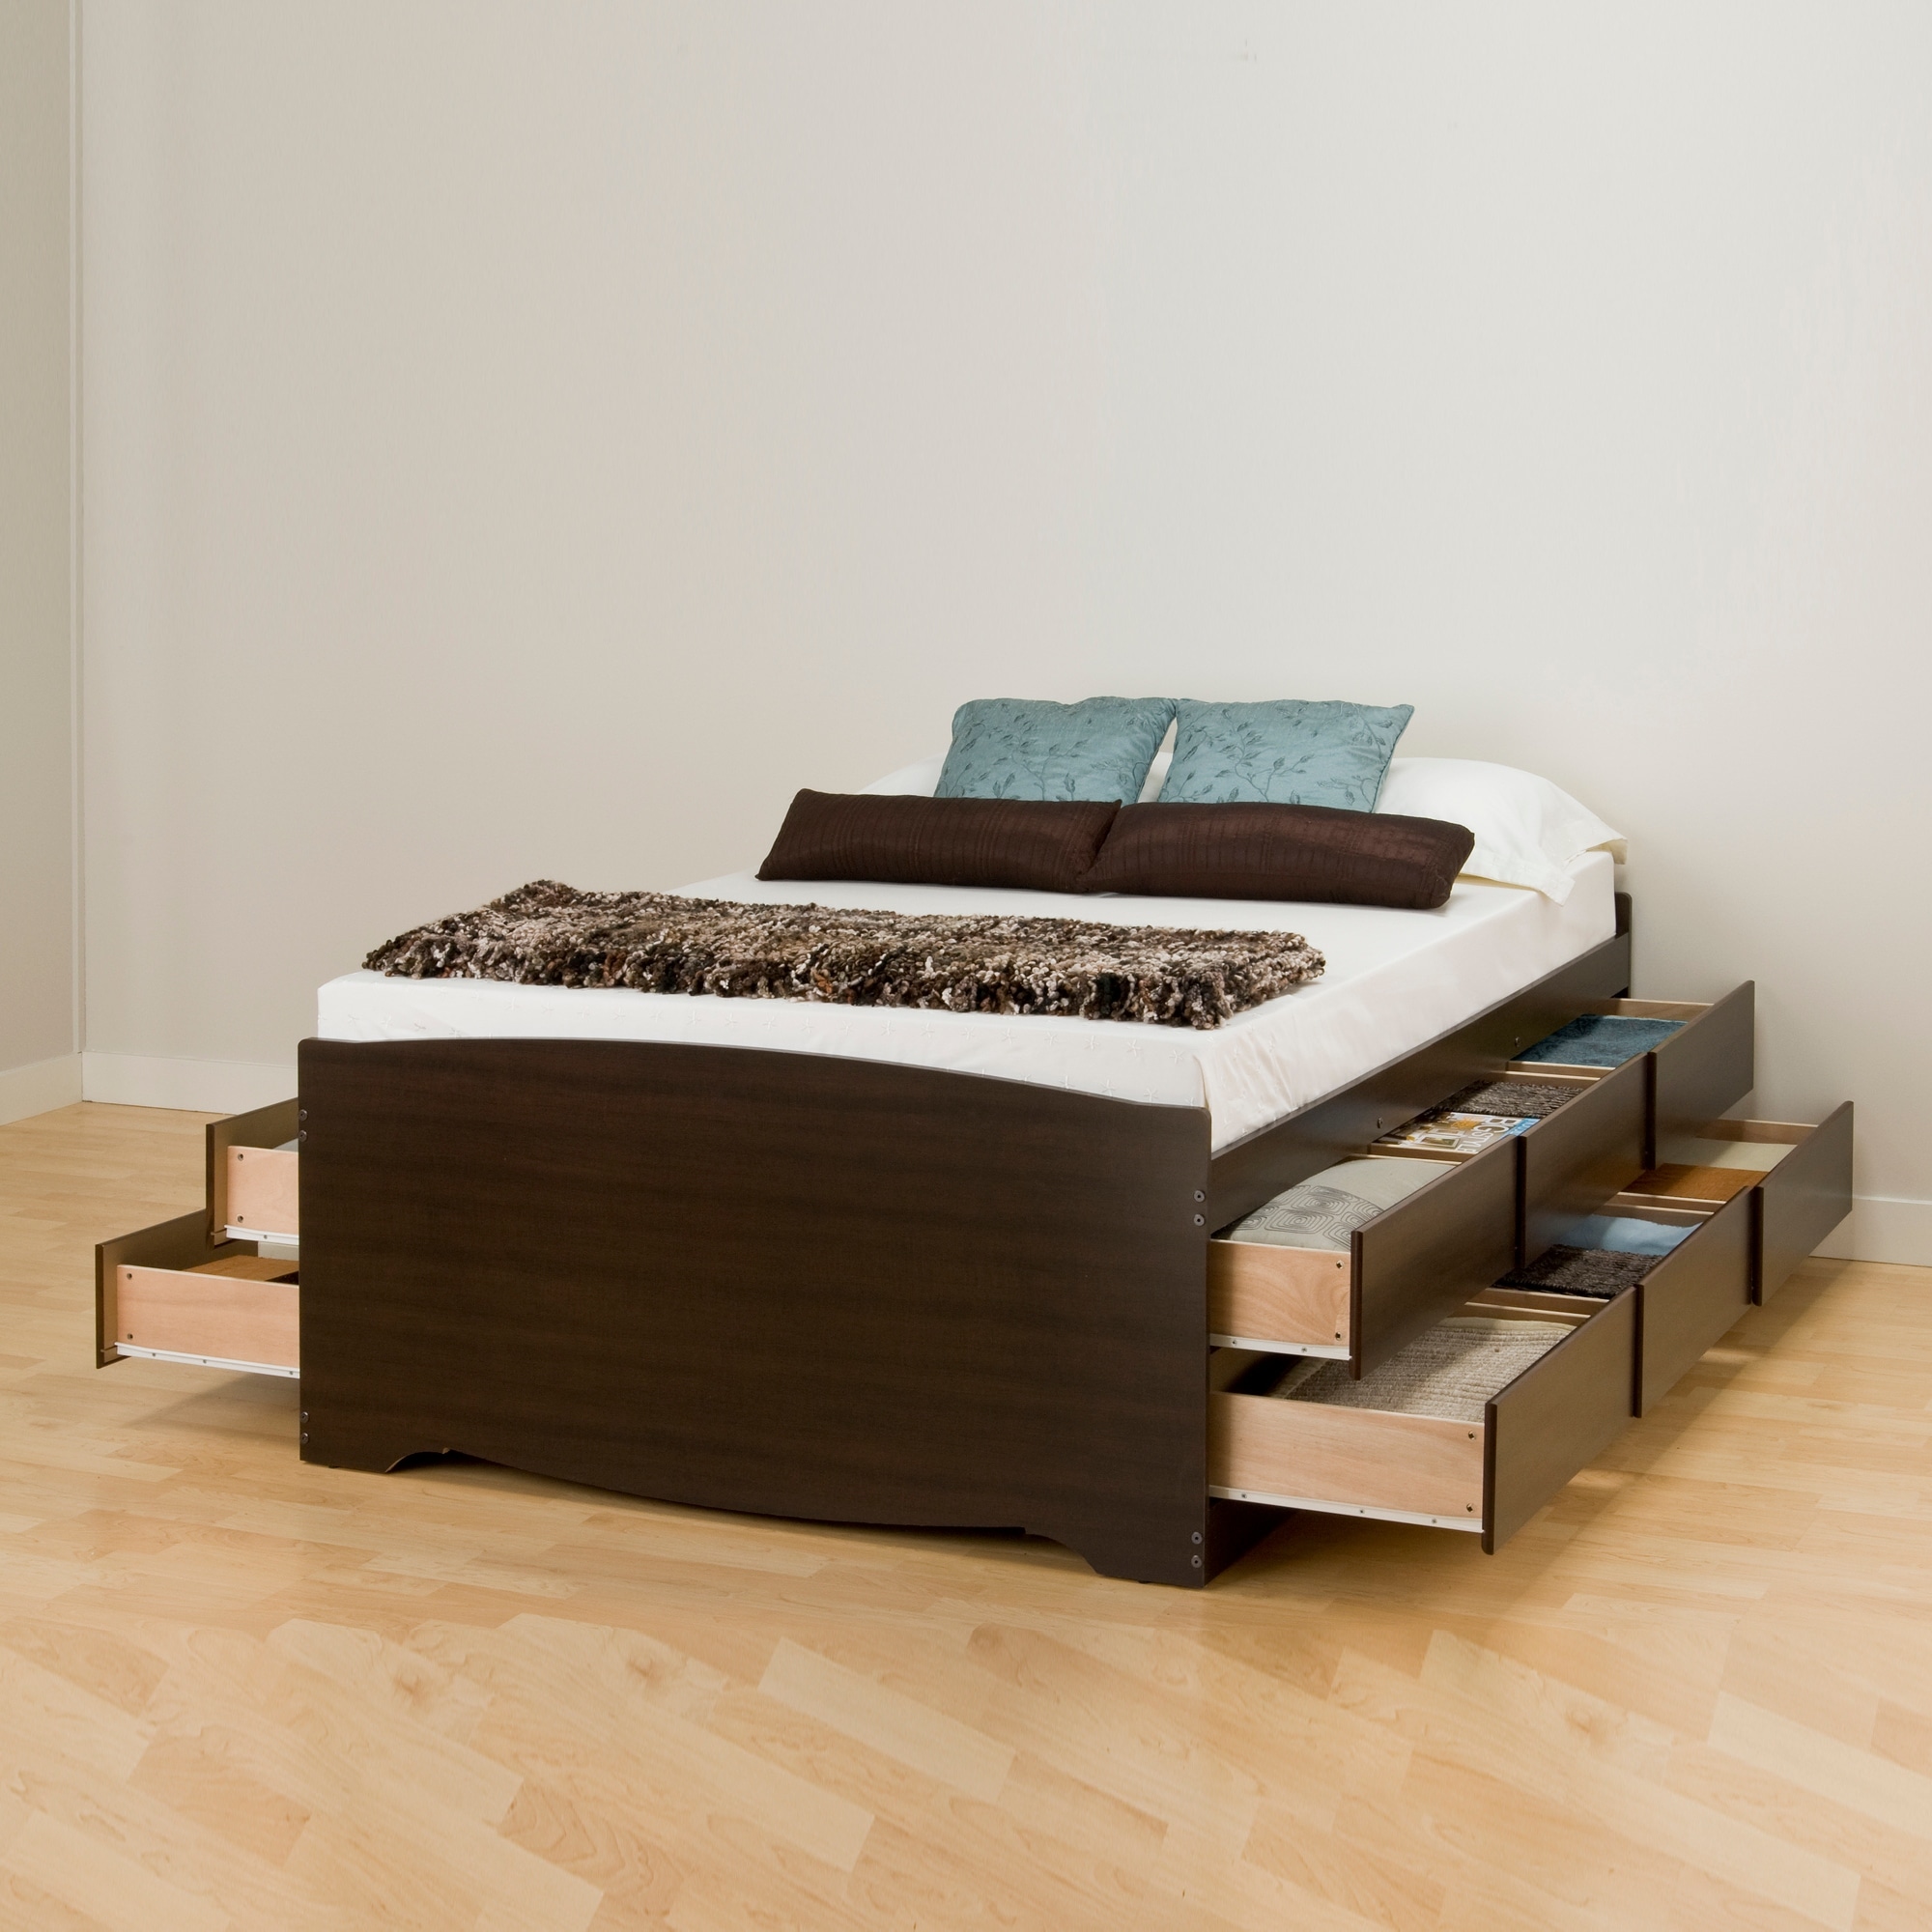 Prepac Tall Queen Captain'S Platform Storage Bed With 12 Drawers - Bed Bath  & Beyond - 3701486